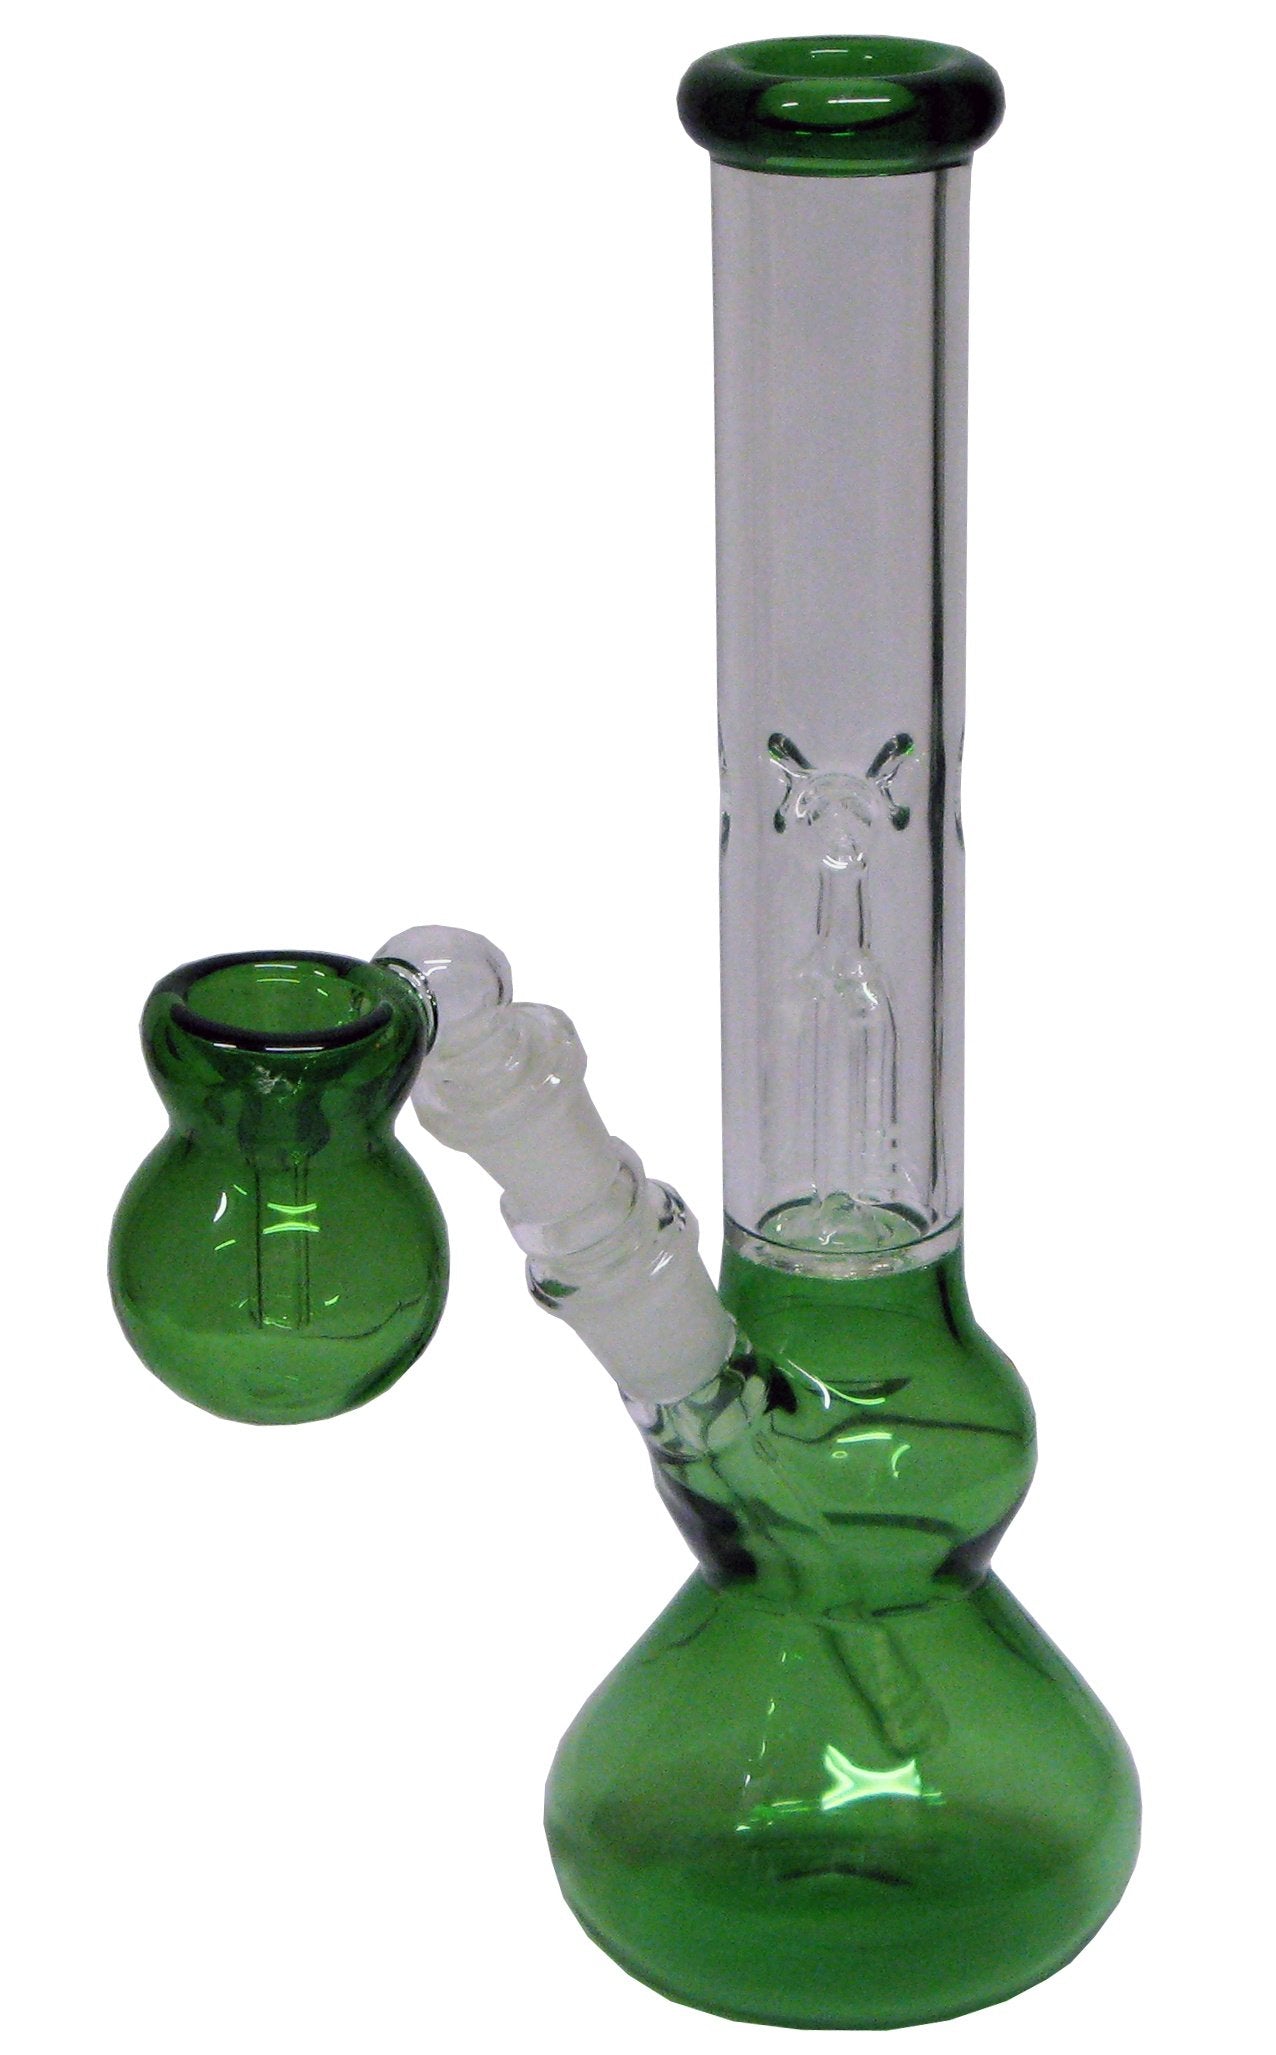 Spare Bowl for XGB32GN (14.5mm joint)